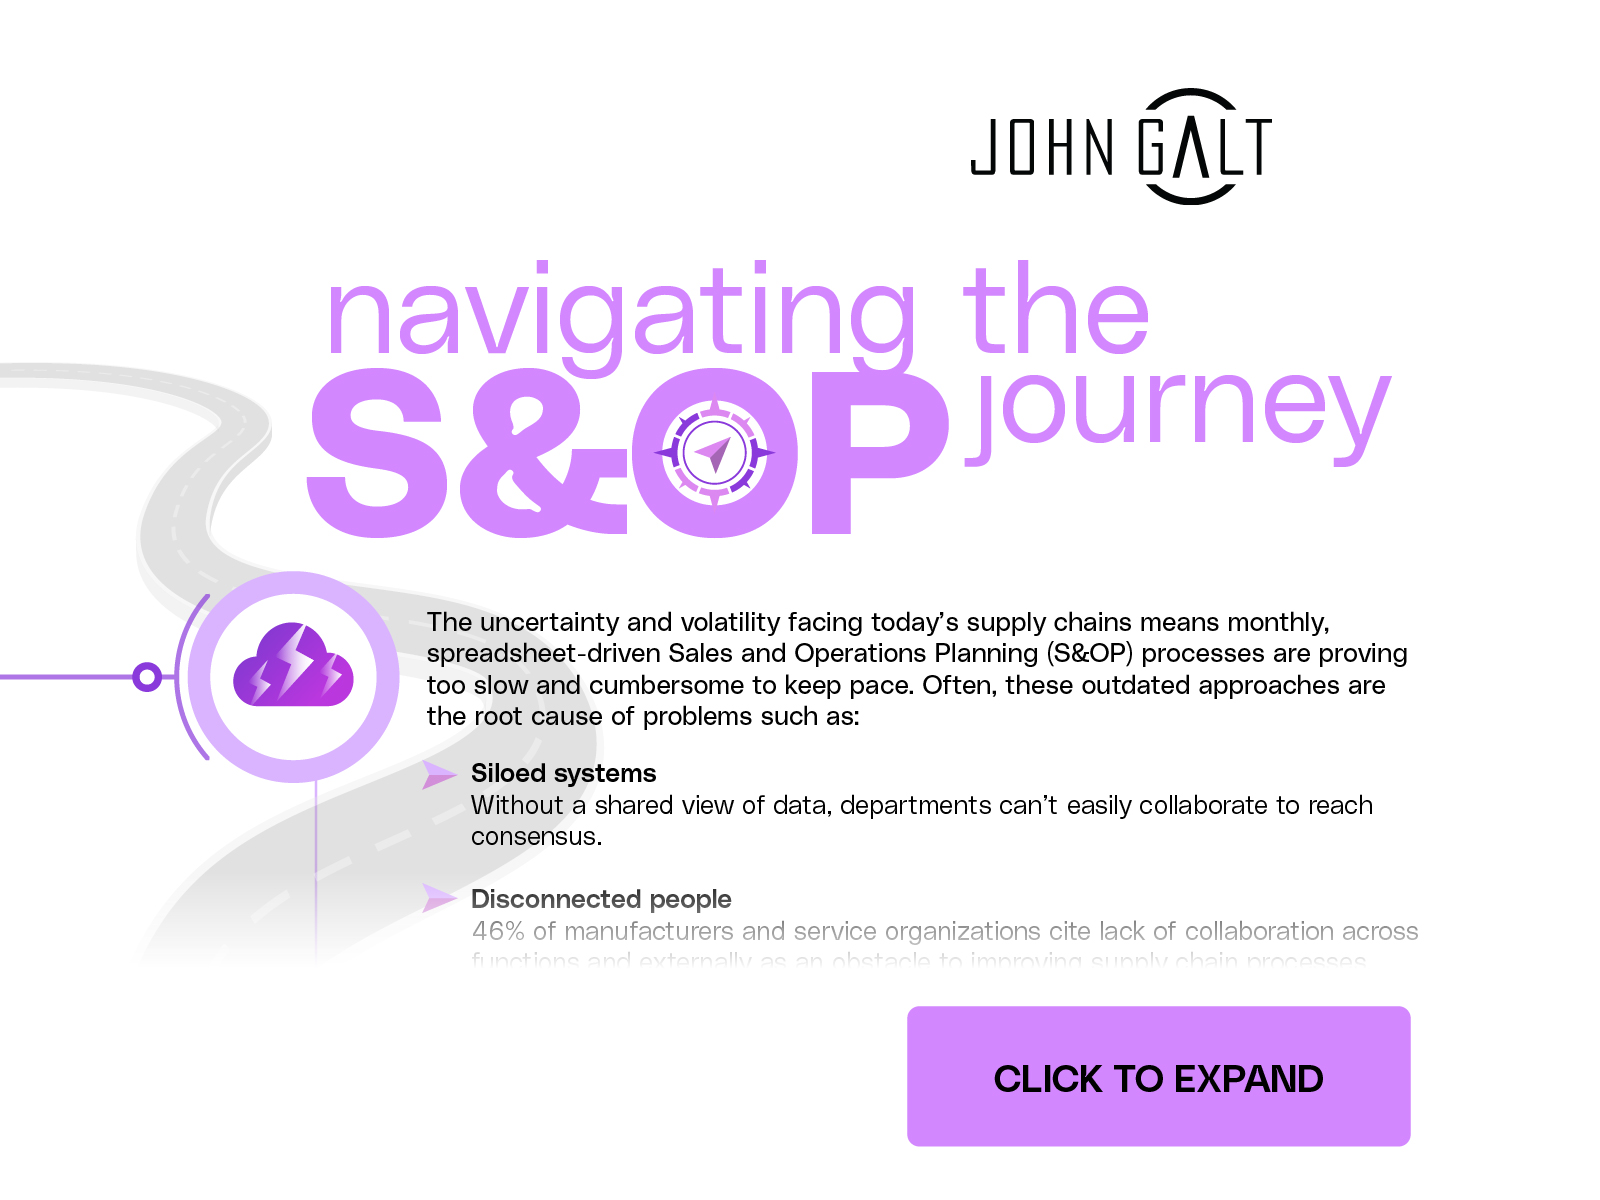 A Visual Guide to Navigate the S&OP Journey Thumbnail